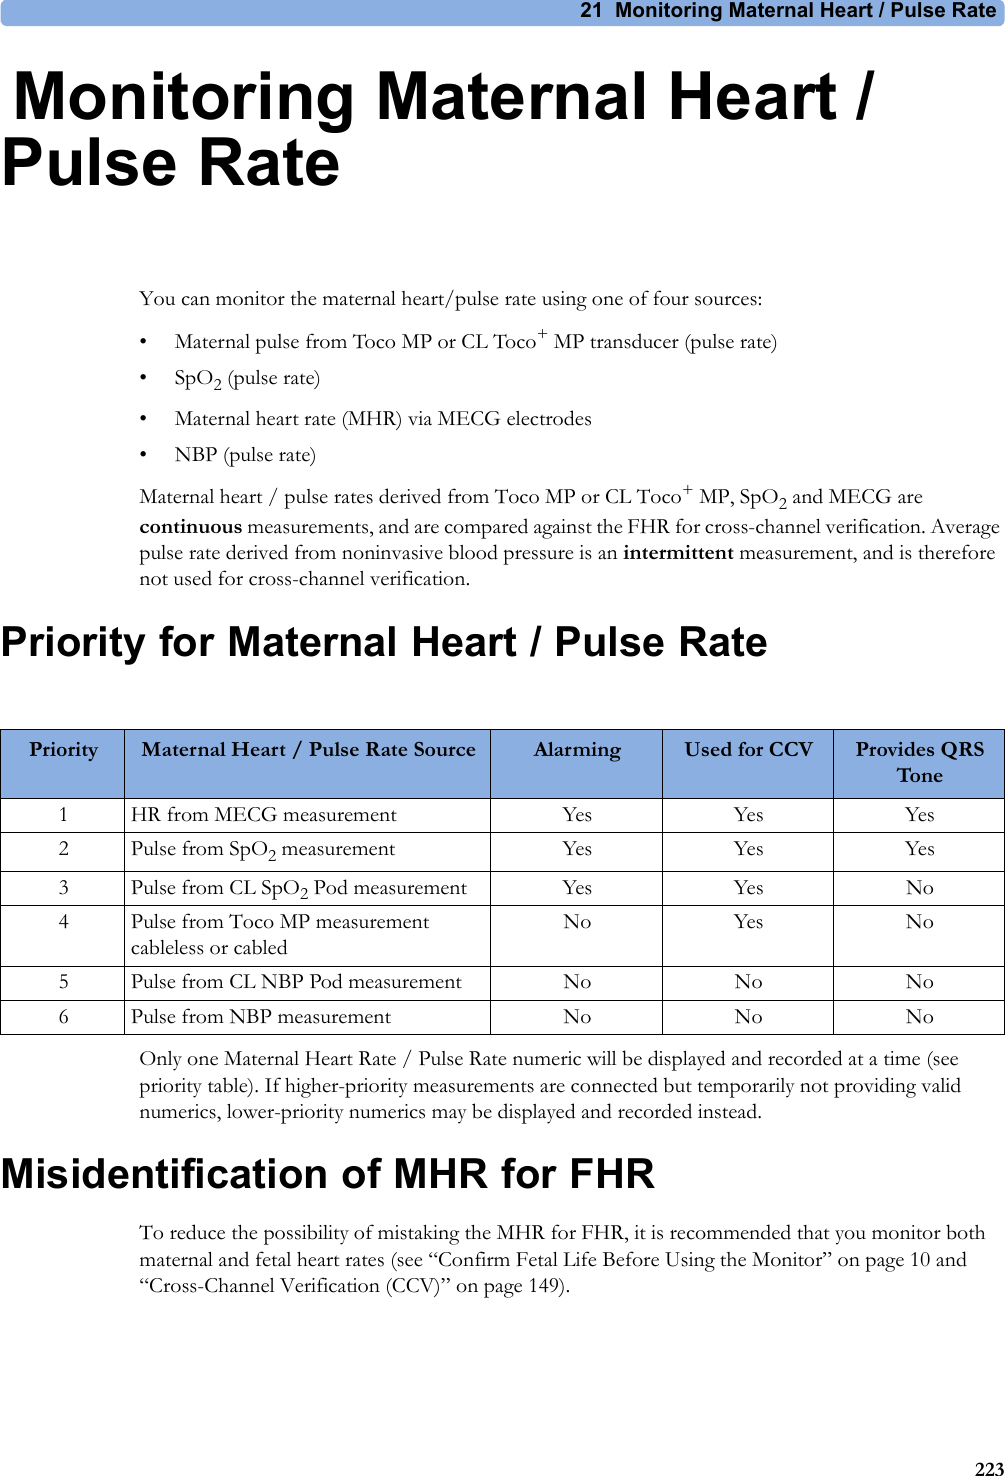 21 Monitoring Maternal Heart / Pulse Rate22321Monitoring Maternal Heart / Pulse RateYou can monitor the maternal heart/pulse rate using one of four sources:• Maternal pulse from Toco MP or CL Toco+MP transducer (pulse rate)•SpO2 (pulse rate)• Maternal heart rate (MHR) via MECG electrodes• NBP (pulse rate)Maternal heart / pulse rates derived from Toco MP or CL Toco+MP, SpO2 and MECG are continuous measurements, and are compared against the FHR for cross-channel verification. Average pulse rate derived from noninvasive blood pressure is an intermittent measurement, and is therefore not used for cross-channel verification.Priority for Maternal Heart / Pulse RateOnly one Maternal Heart Rate / Pulse Rate numeric will be displayed and recorded at a time (see priority table). If higher-priority measurements are connected but temporarily not providing valid numerics, lower-priority numerics may be displayed and recorded instead. Misidentification of MHR for FHRTo reduce the possibility of mistaking the MHR for FHR, it is recommended that you monitor both maternal and fetal heart rates (see “Confirm Fetal Life Before Using the Monitor” on page 10 and “Cross-Channel Verification (CCV)” on page 149).Priority Maternal Heart / Pulse Rate Source Alarming Used for CCV Provides QRS Tone1 HR from MECG measurement Yes Yes Yes2 Pulse from SpO2 measurement Yes Yes Yes3 Pulse from CL SpO2 Pod measurement  Yes Yes No4 Pulse from Toco MP measurement cableless or cabled No Yes No5 Pulse from CL NBP Pod measurement No No No6 Pulse from NBP measurement No No No